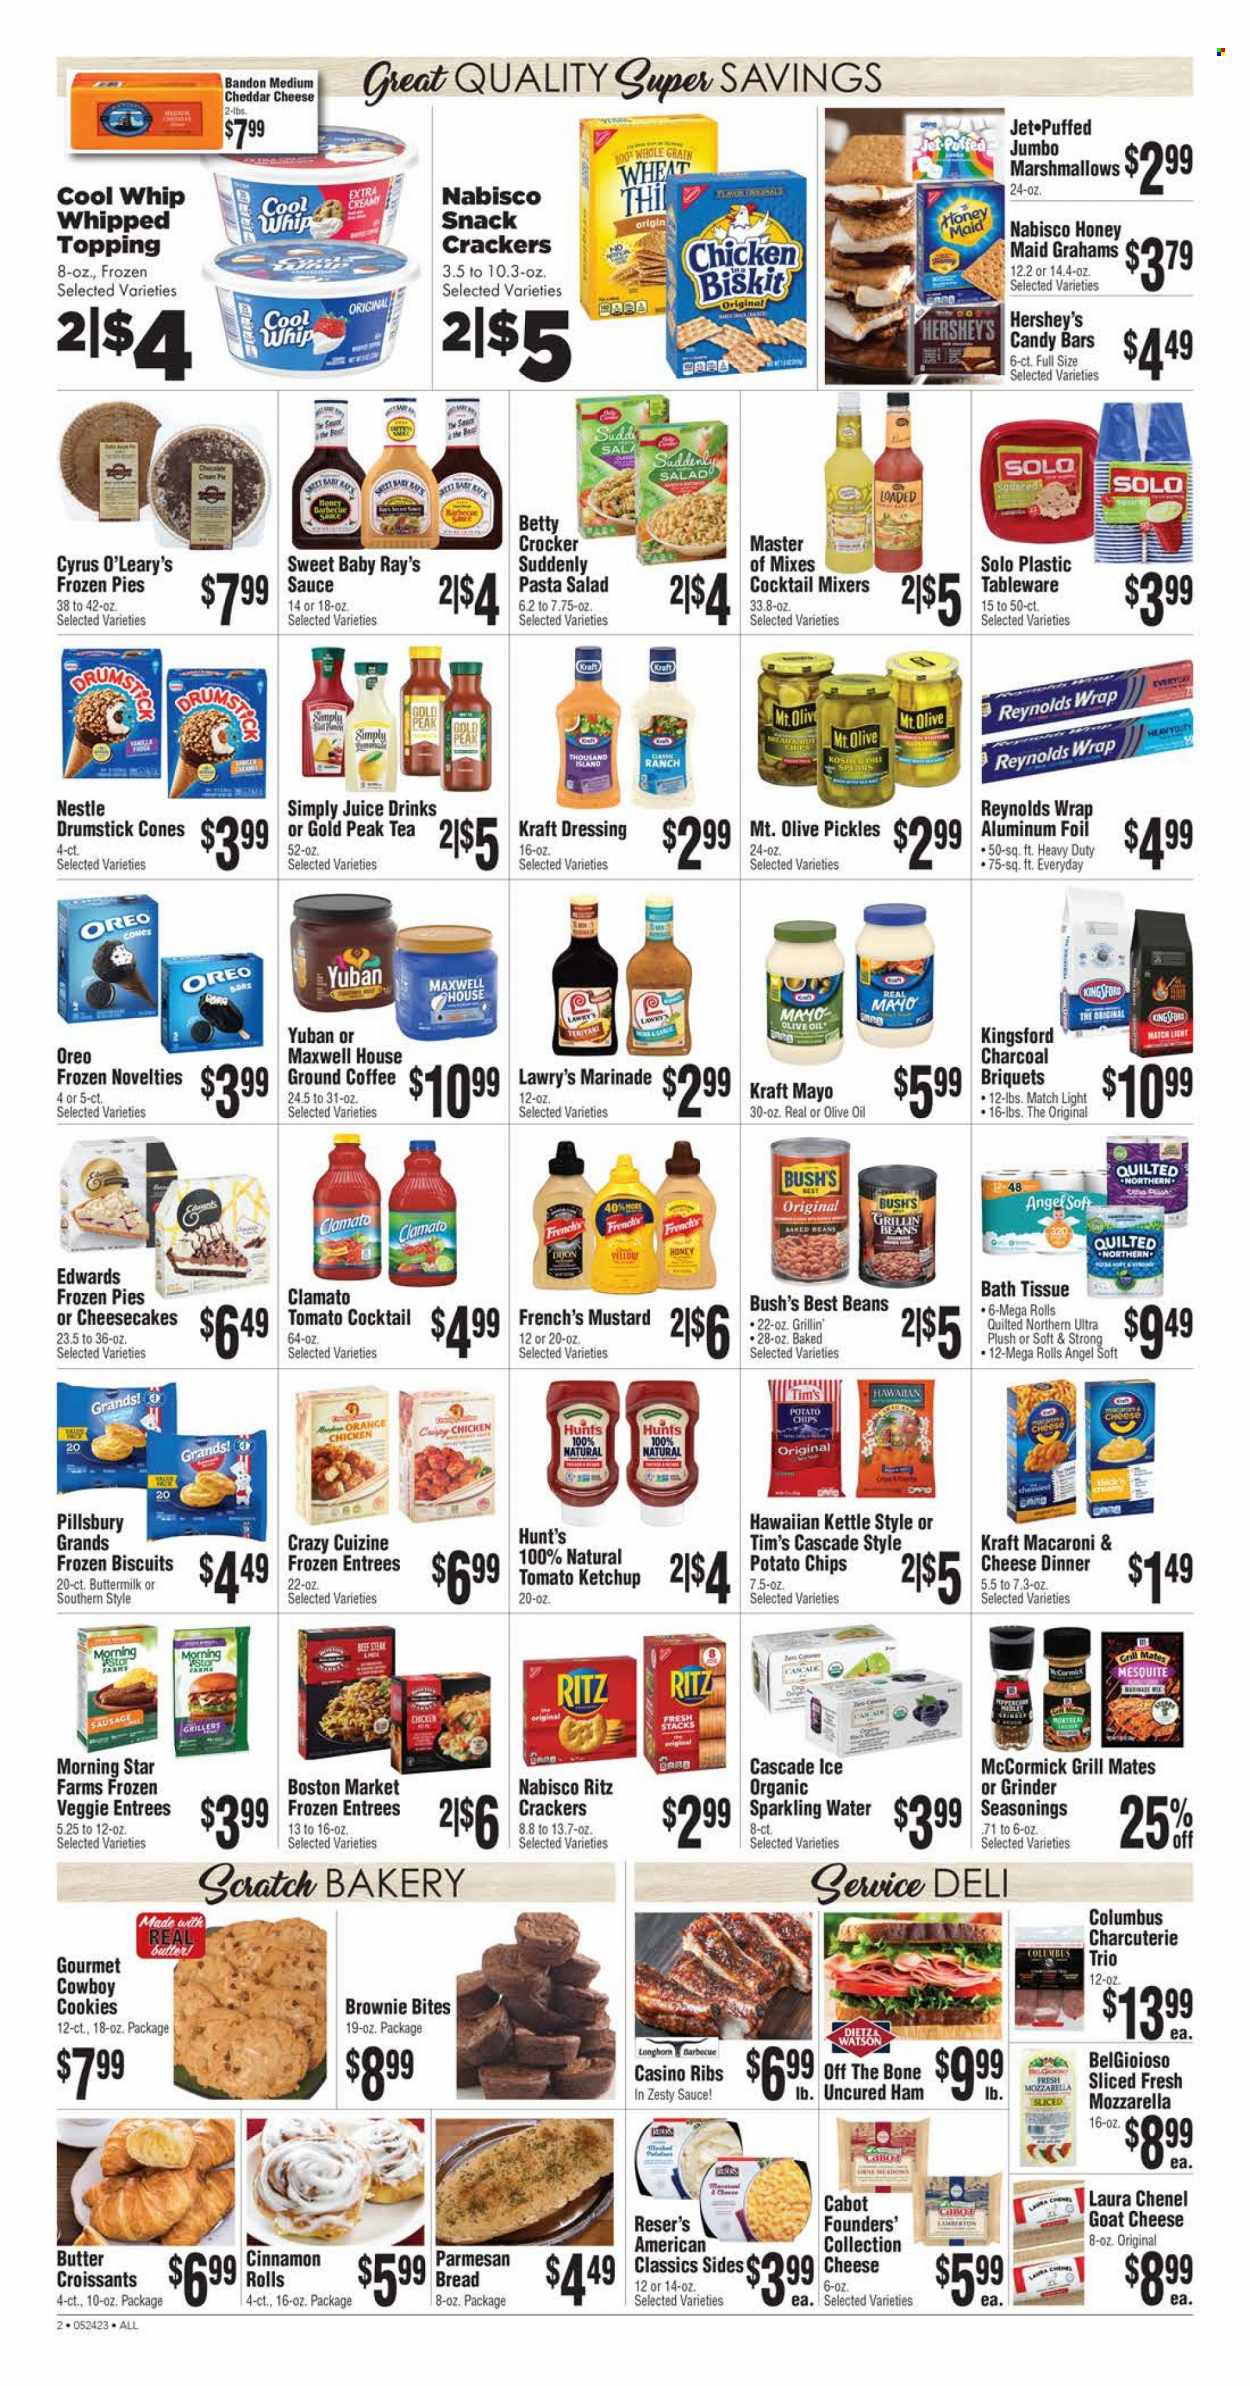 thumbnail - Rosauers Flyer - 05/24/2023 - 05/30/2023 - Sales products - bread, pie, croissant, cinnamon roll, cheesecake, brownies, cream pie, macaroons, salad, oranges, macaroni & cheese, pasta, Pillsbury, Kraft®, Kingsford, uncured ham, ham, snack, sausage, pasta salad, goat cheese, Longhorn cheese, mozzarella, parmesan, Oreo, buttermilk, Cool Whip, mayonnaise, Thousand Island dressing, ice cream, Hershey's, ice cones, frozen pies, cookies, marshmallows, Nestlé, crackers, biscuit, RITZ, candy bar, Nabisco, potato chips, topping, pickles, Honey Maid, dill, mustard, ketchup, dressing, marinade, olive oil, juice, ice tea, Clamato, Gold Peak Tea, sparkling water, water, Maxwell House, coffee, ground coffee, chicken, beef meat, beef steak, steak, ribs, bath tissue, Quilted Northern, Cascade, Rin, Jet. Page 2.